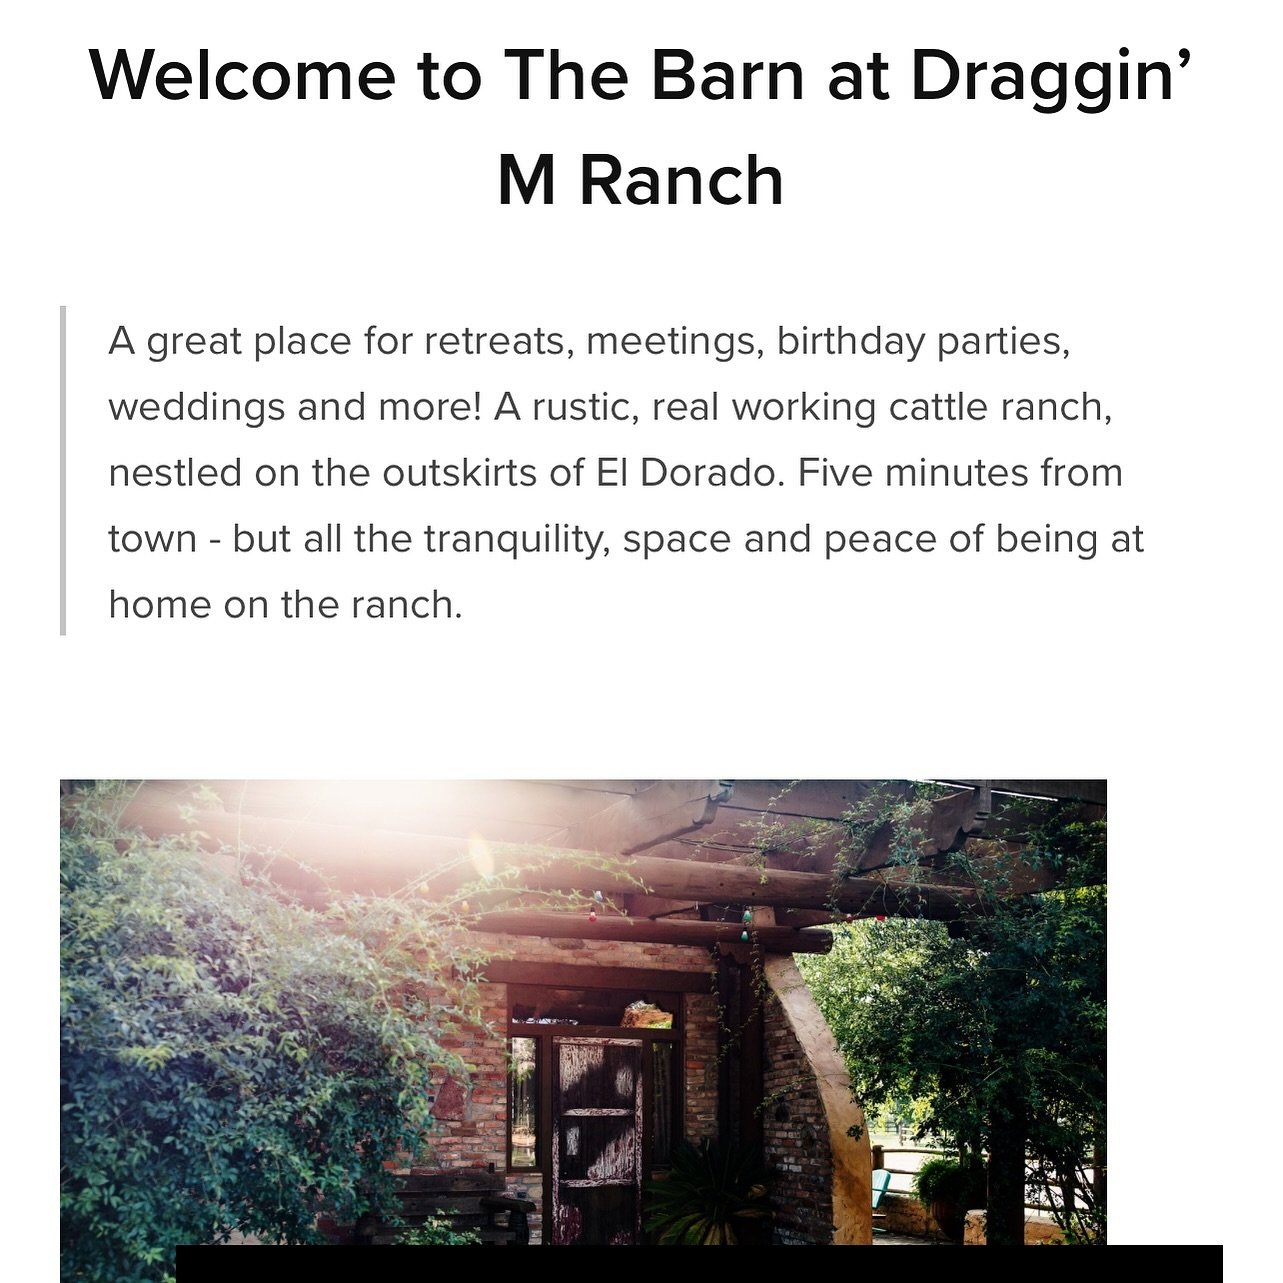 The Barn at Draggin&rsquo; M Ranch is a great place to host showers, parties, weekend retreats and more! We still have a few May and June dates open. Contact us today to book your next event. 

FOR INQUIRIES:
📧: barn@dragginm.com